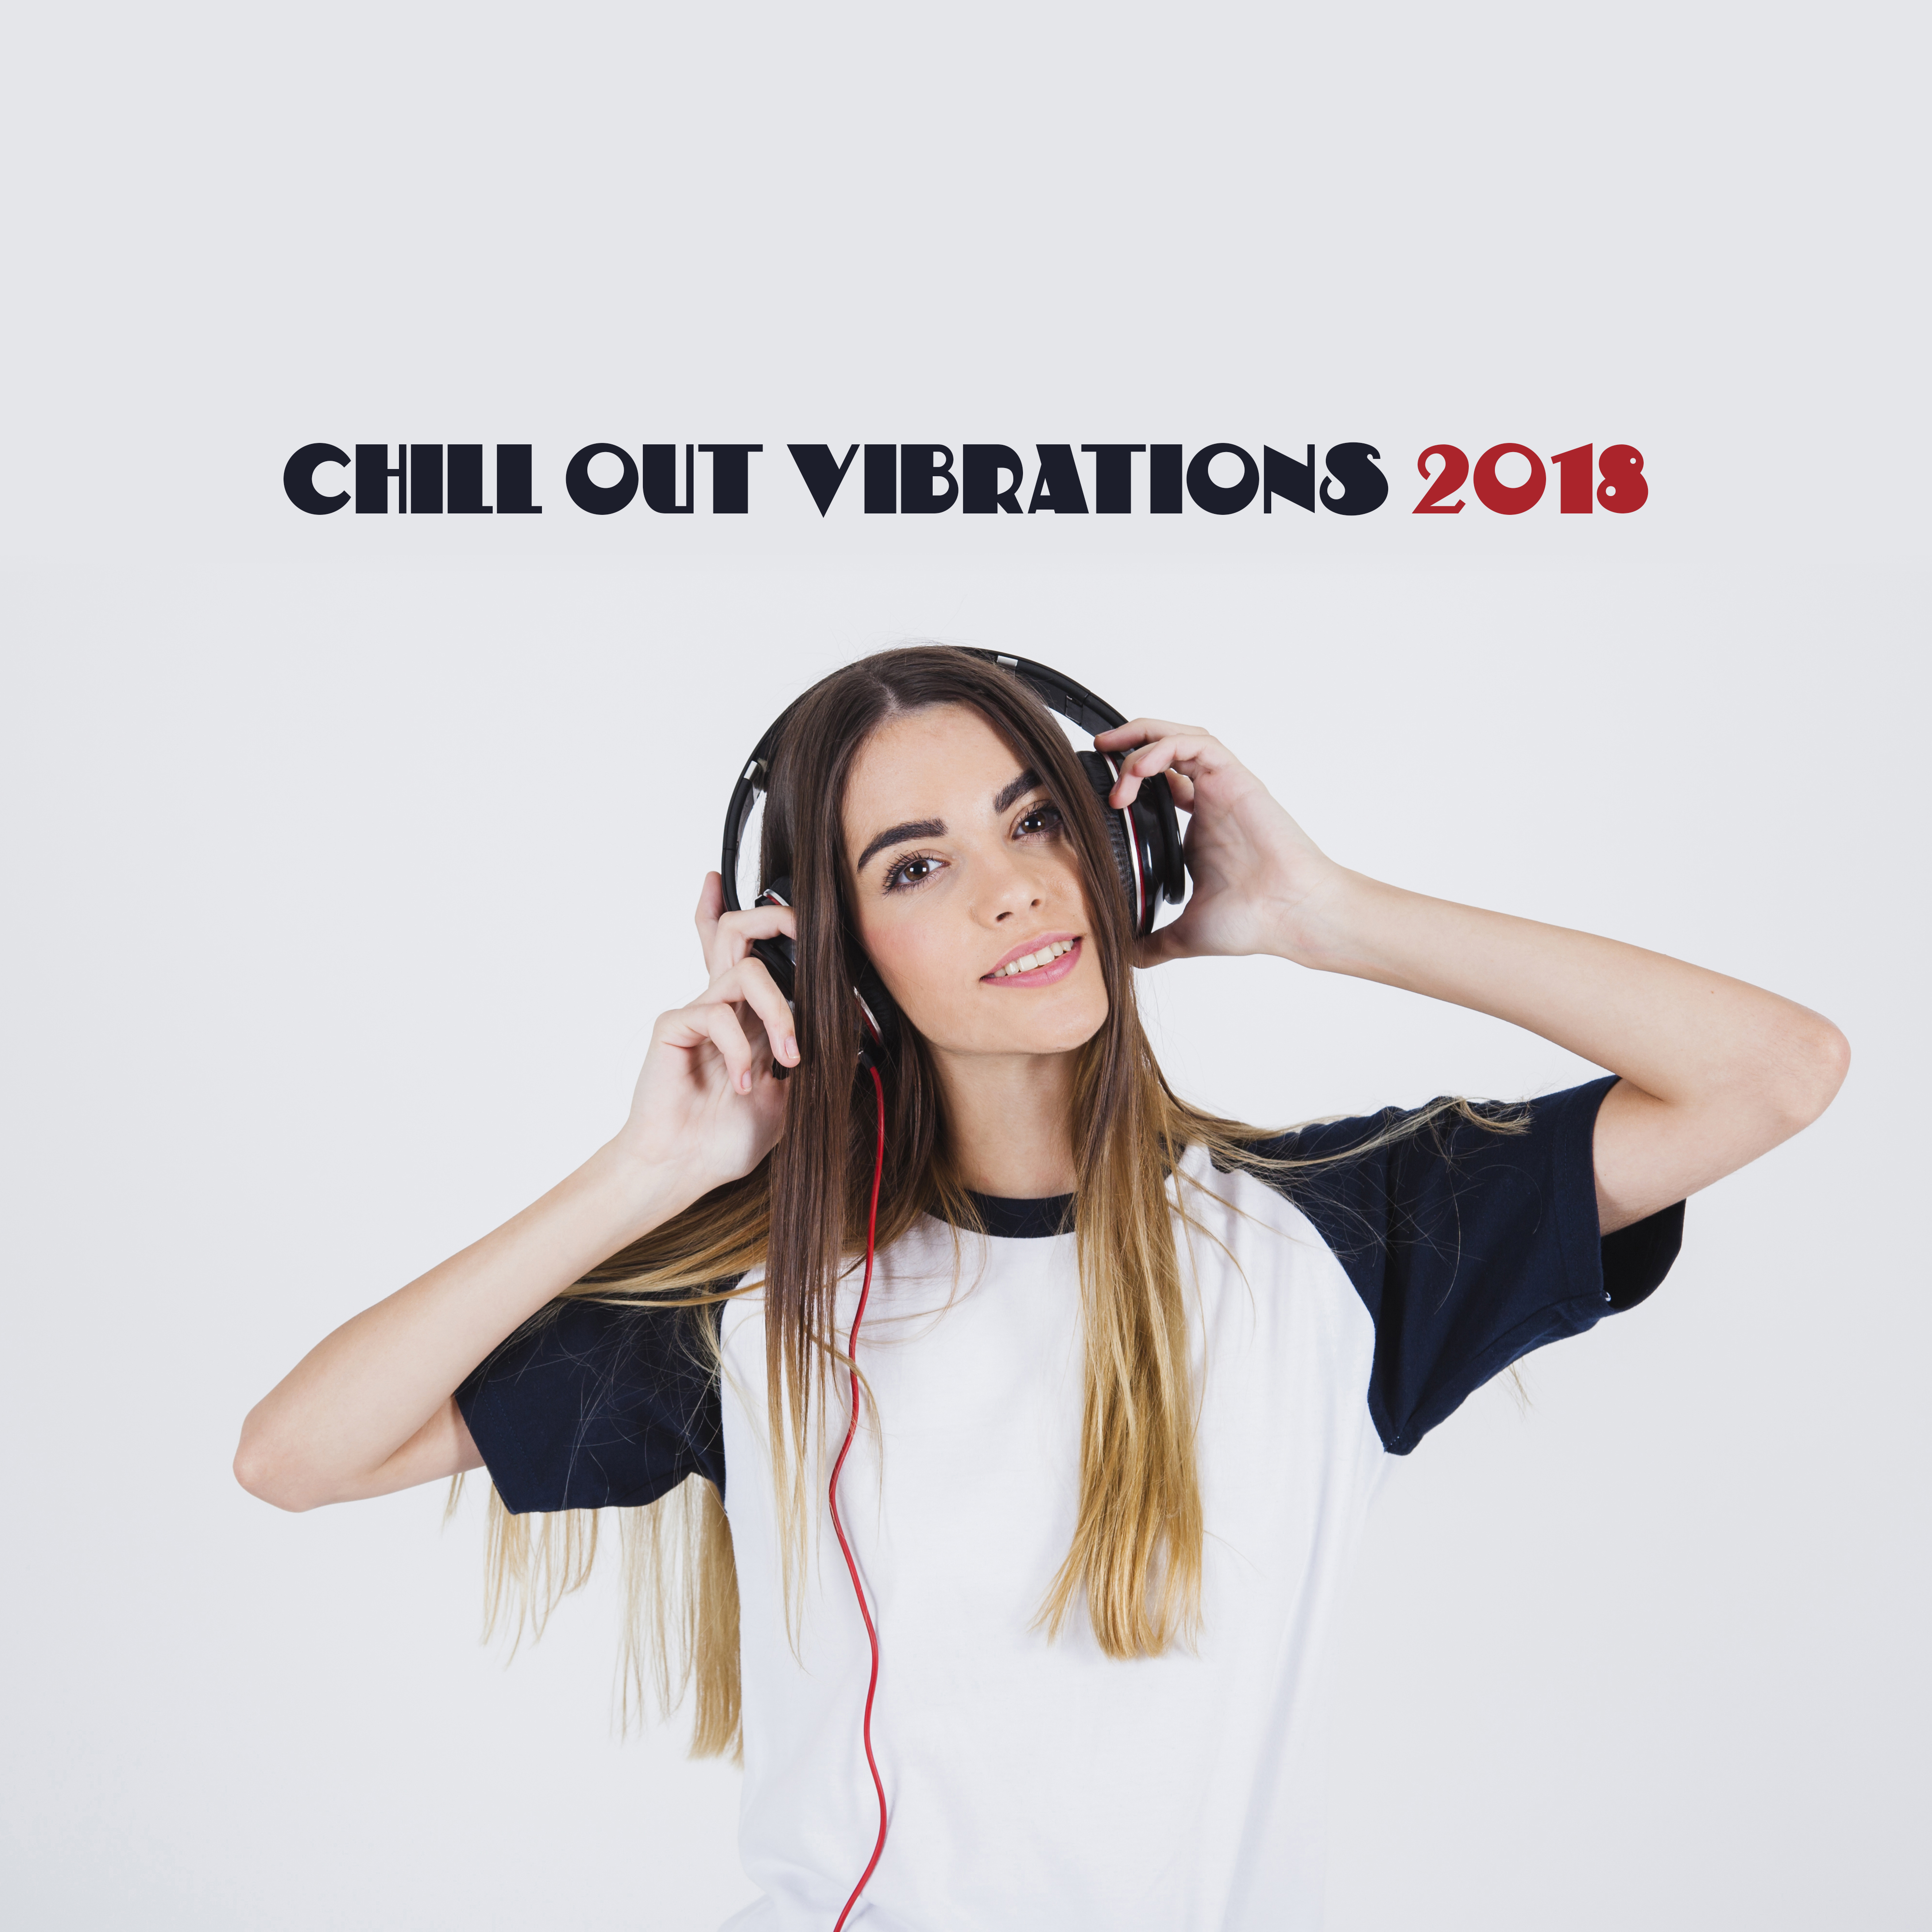 Chill Out Vibrations 2018